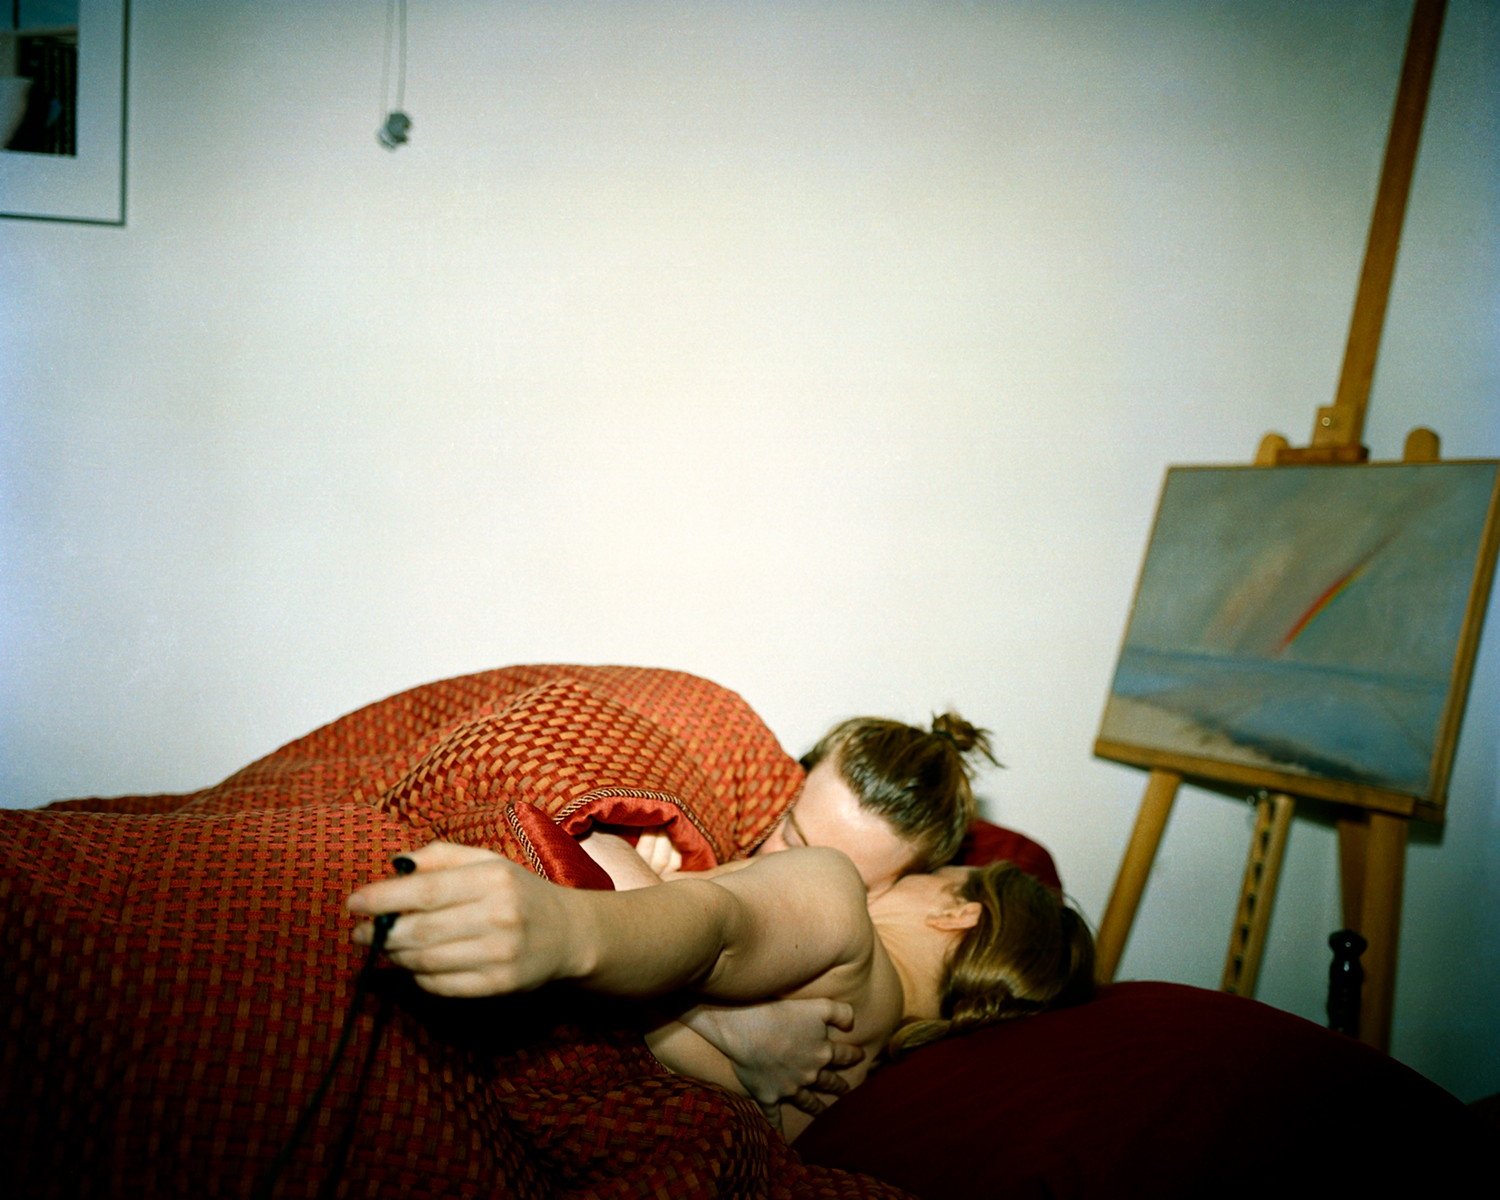 Photographer in Image Hugging Girlfriend in Bed, Rainbow Painting Behind Them